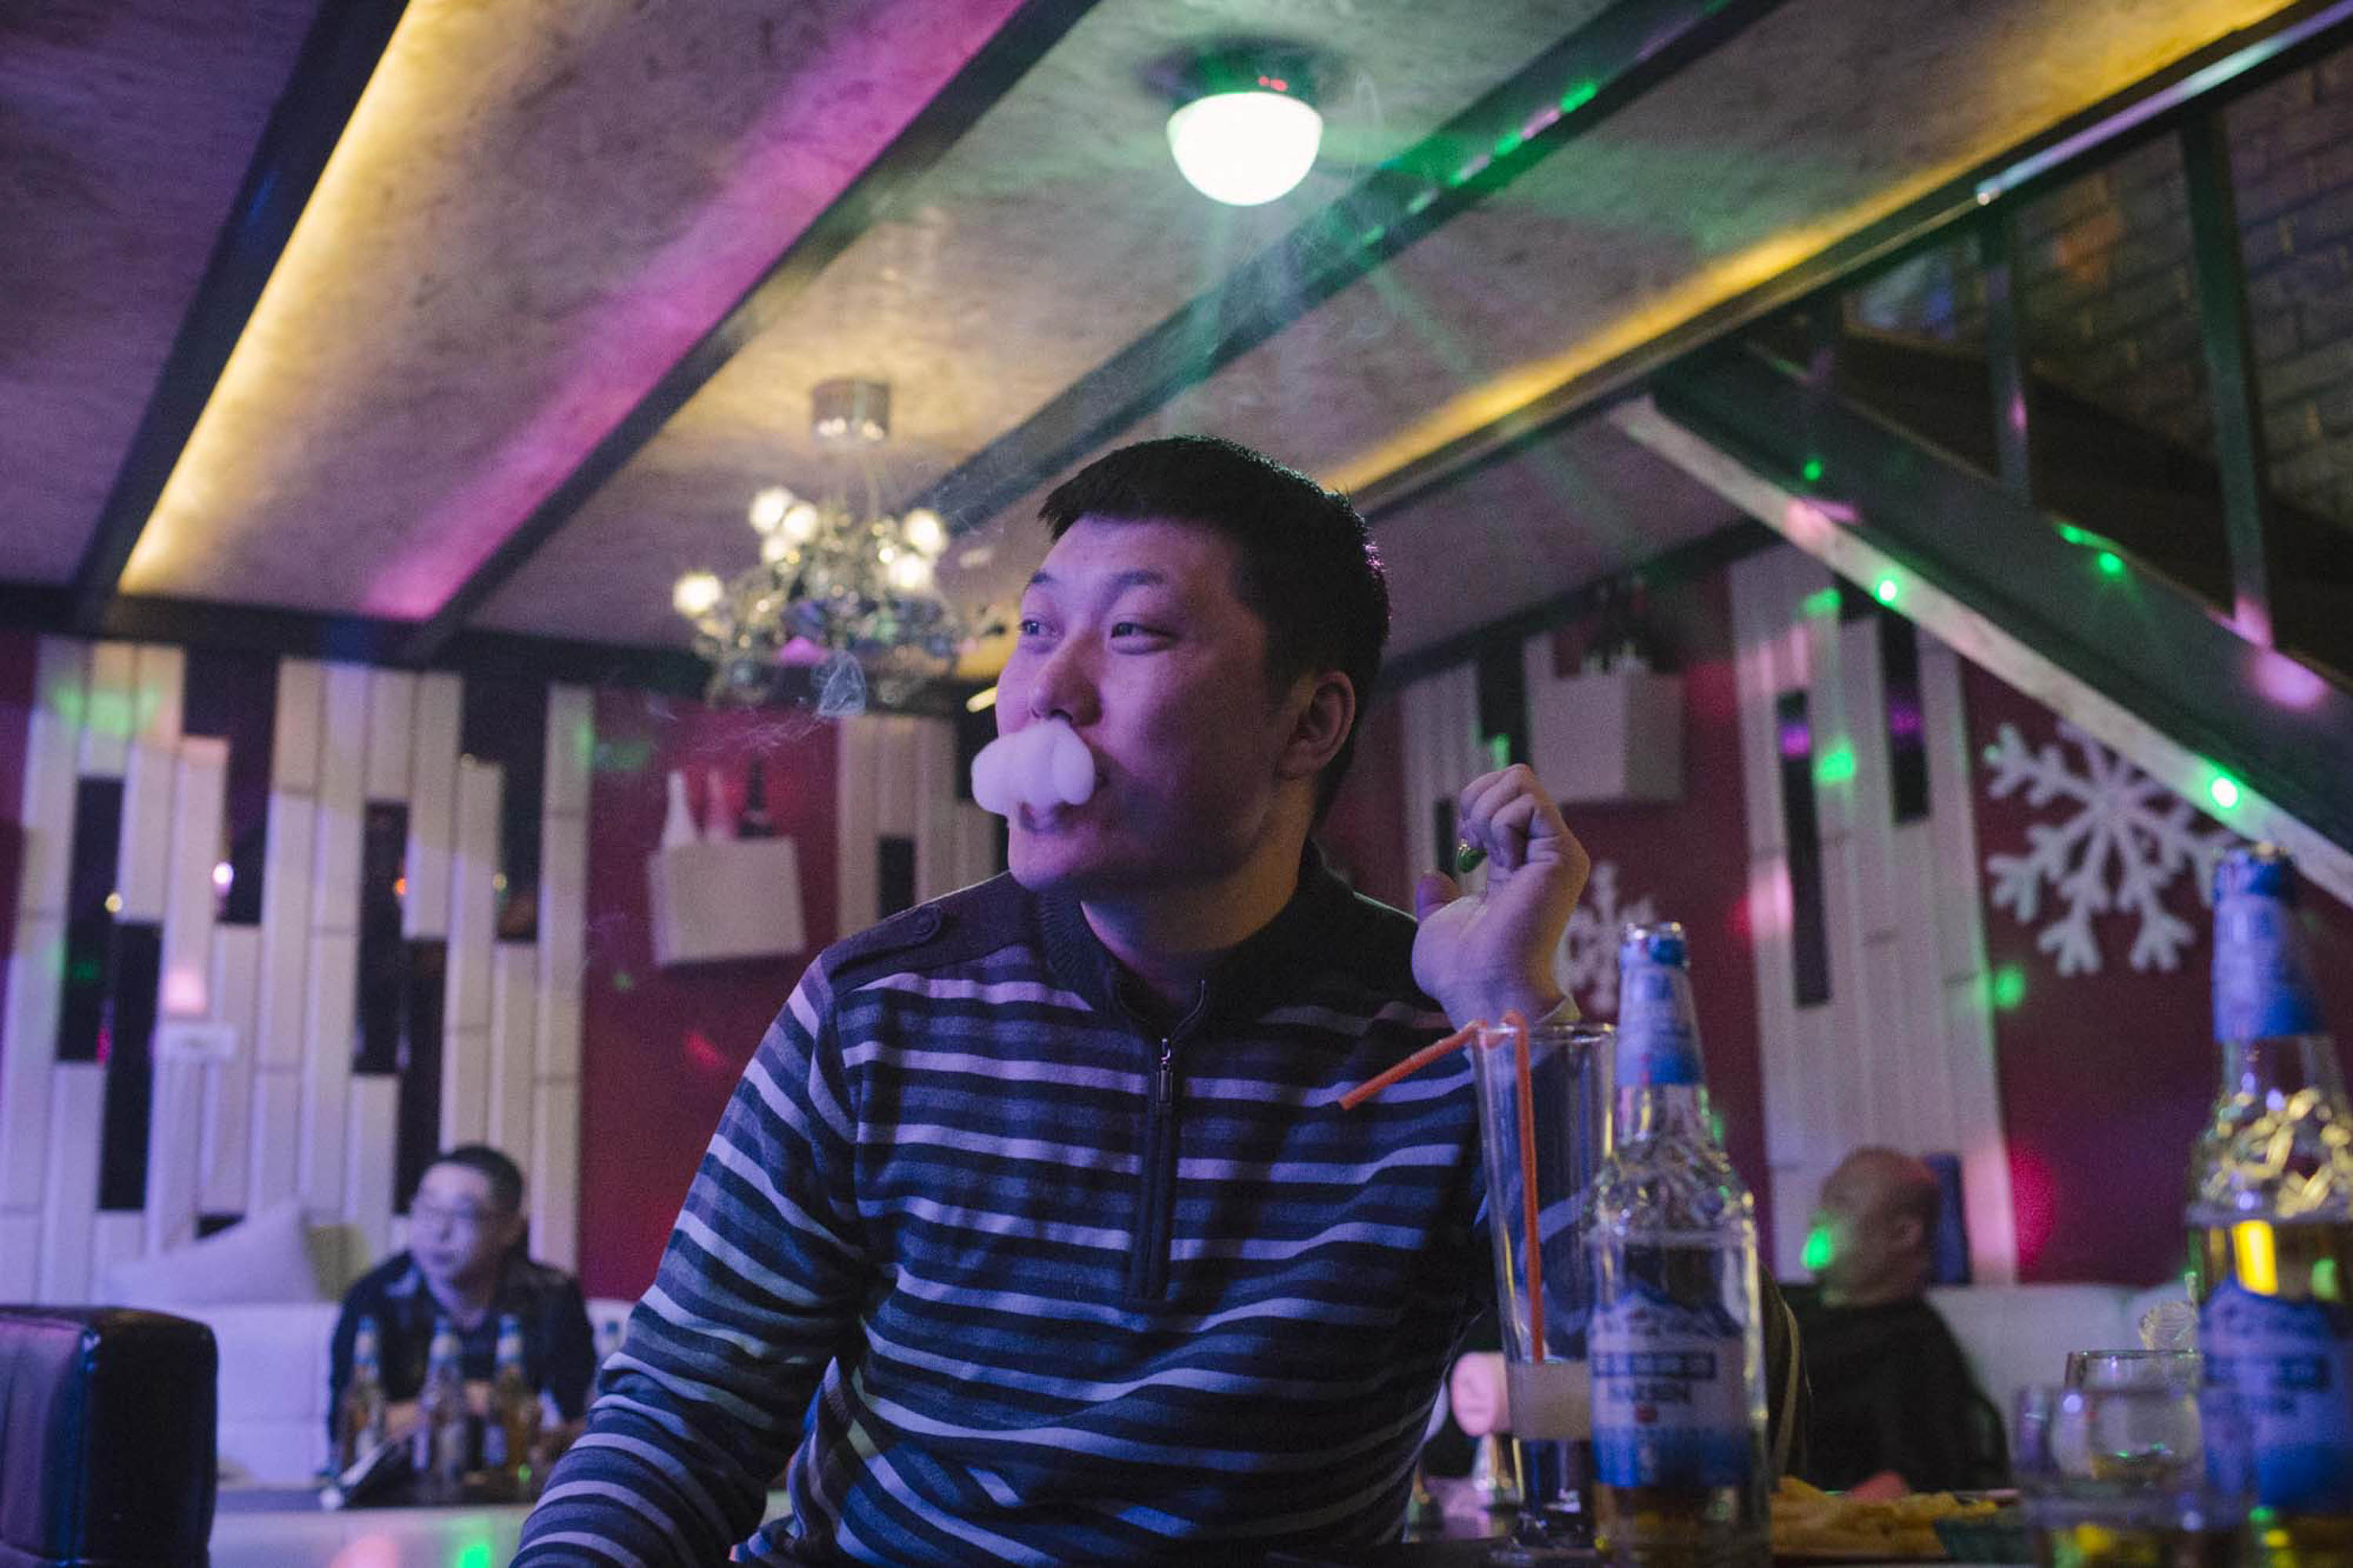 Xia Yan is treated to drinks by friends at one of Shuangyashan’s bars, Jan. 16, 2016. Both Xia’s income and circle of friends have diminished drastically since he lost his lucrative job procuring mining machinery. Zhou Pinglang/Sixth Tone